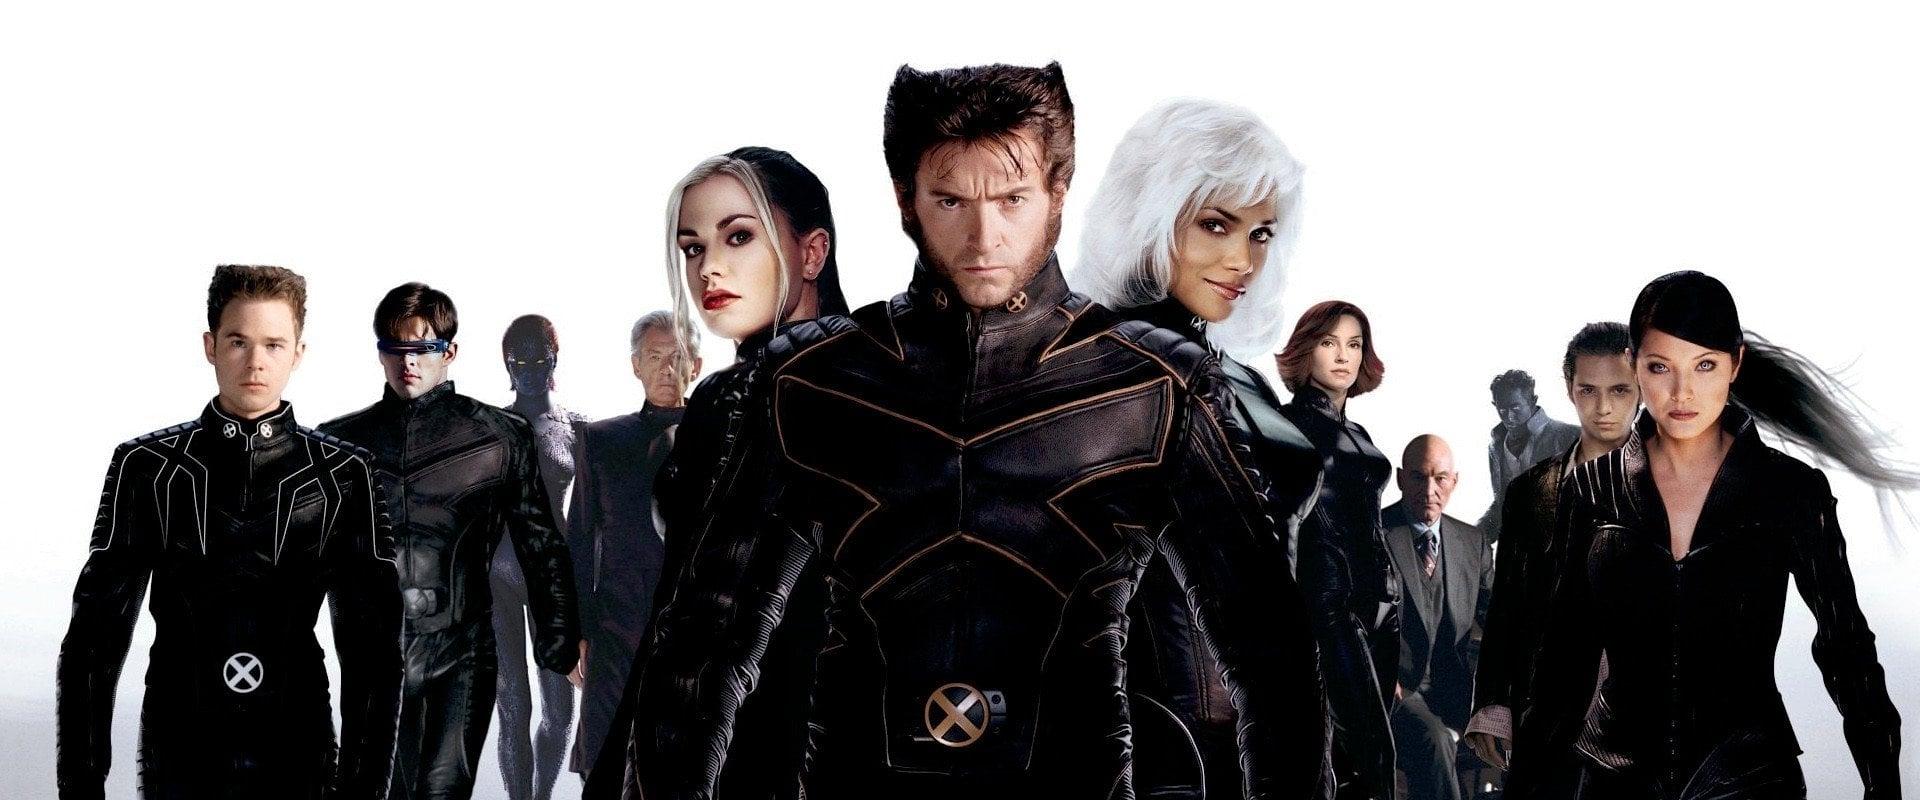 The X-Men from the original movies